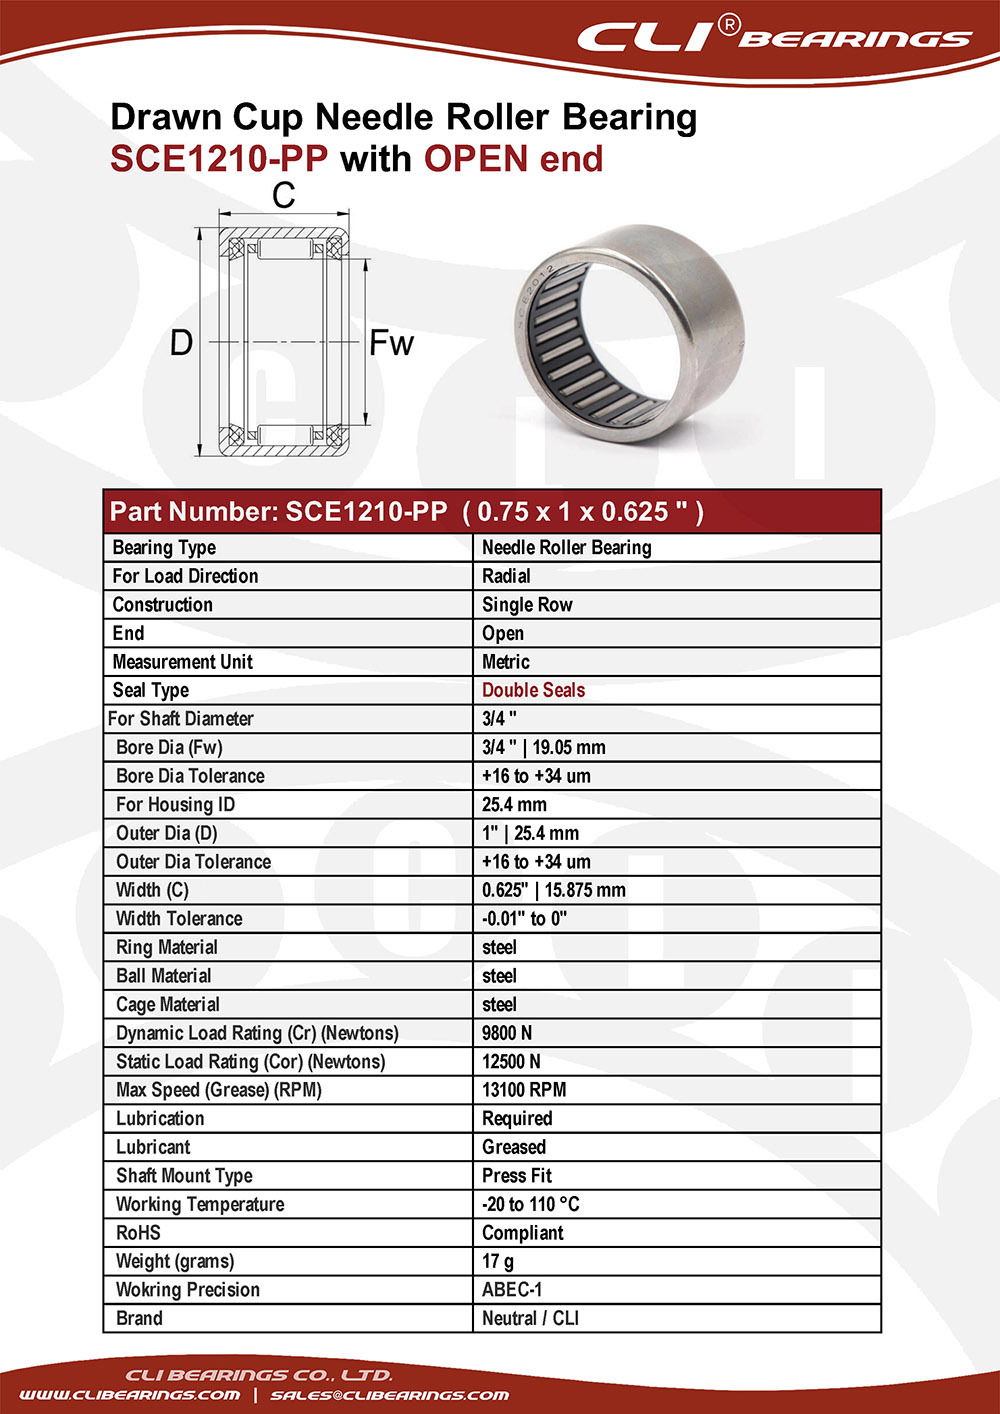 Original sce1210 pp 0 75x1x0 625 drawn cup needle roller bearings with double seals   cli bearings co ltd nw